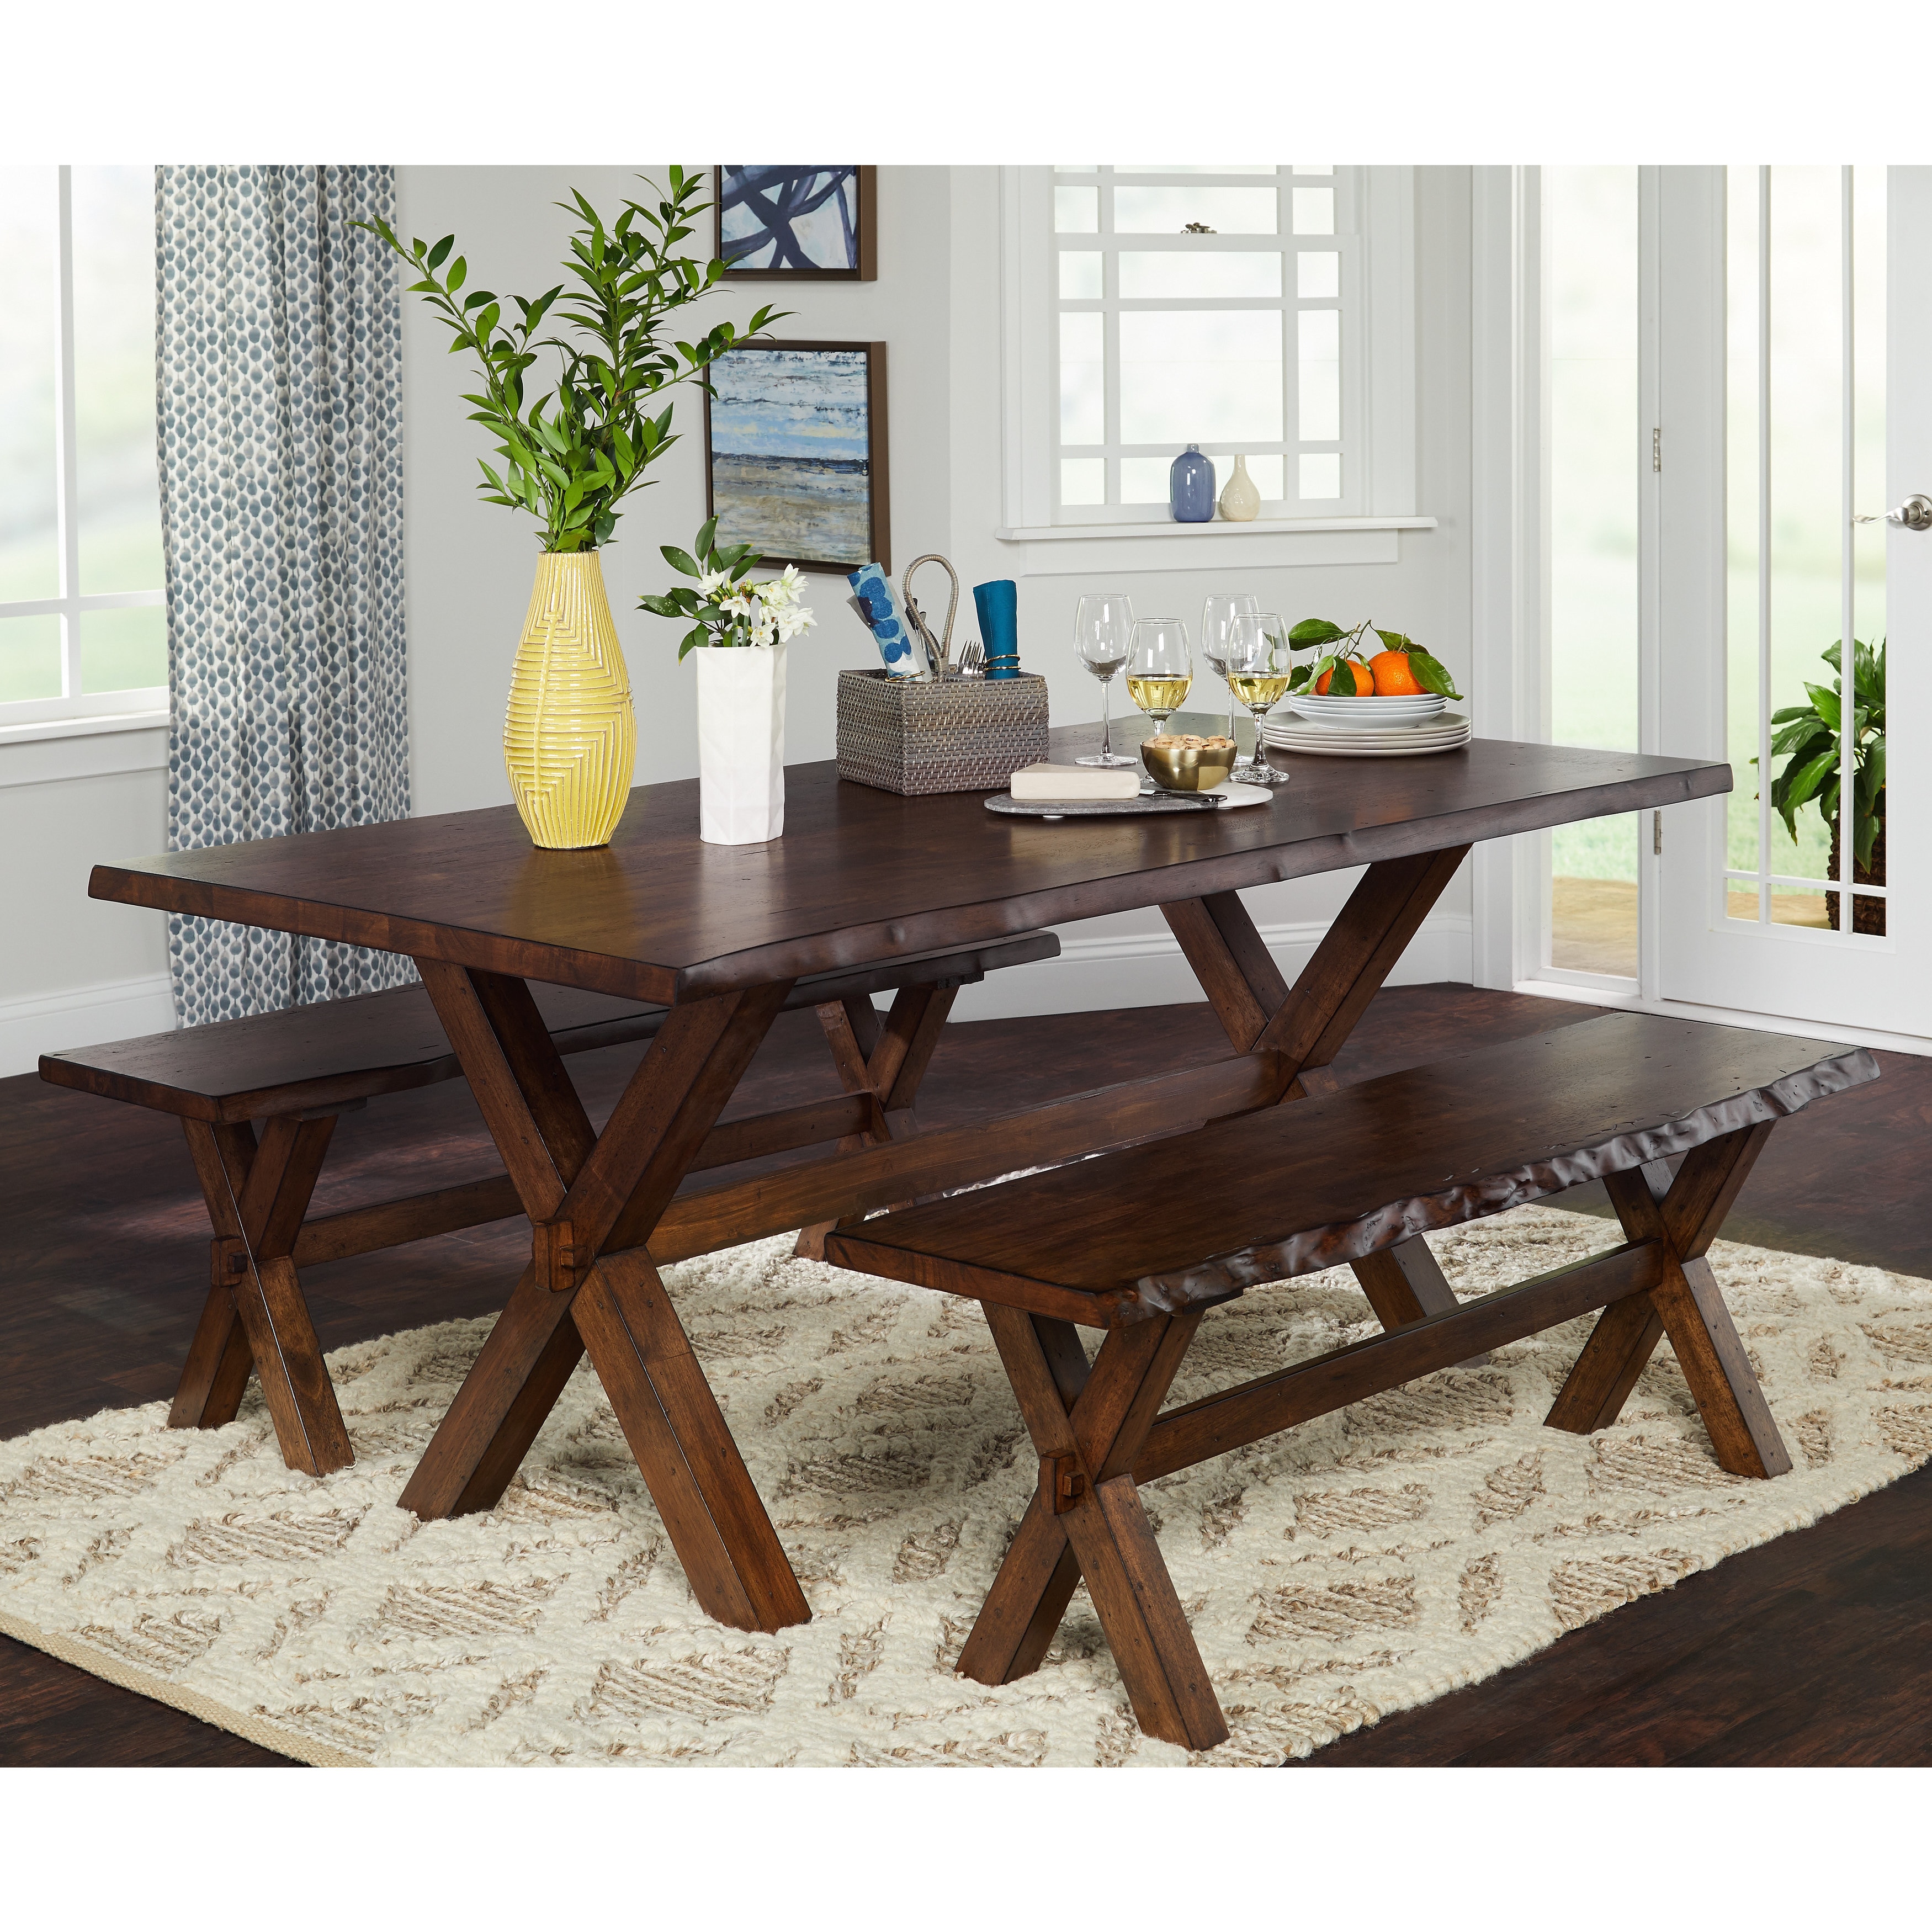 Wood Dining Room Table